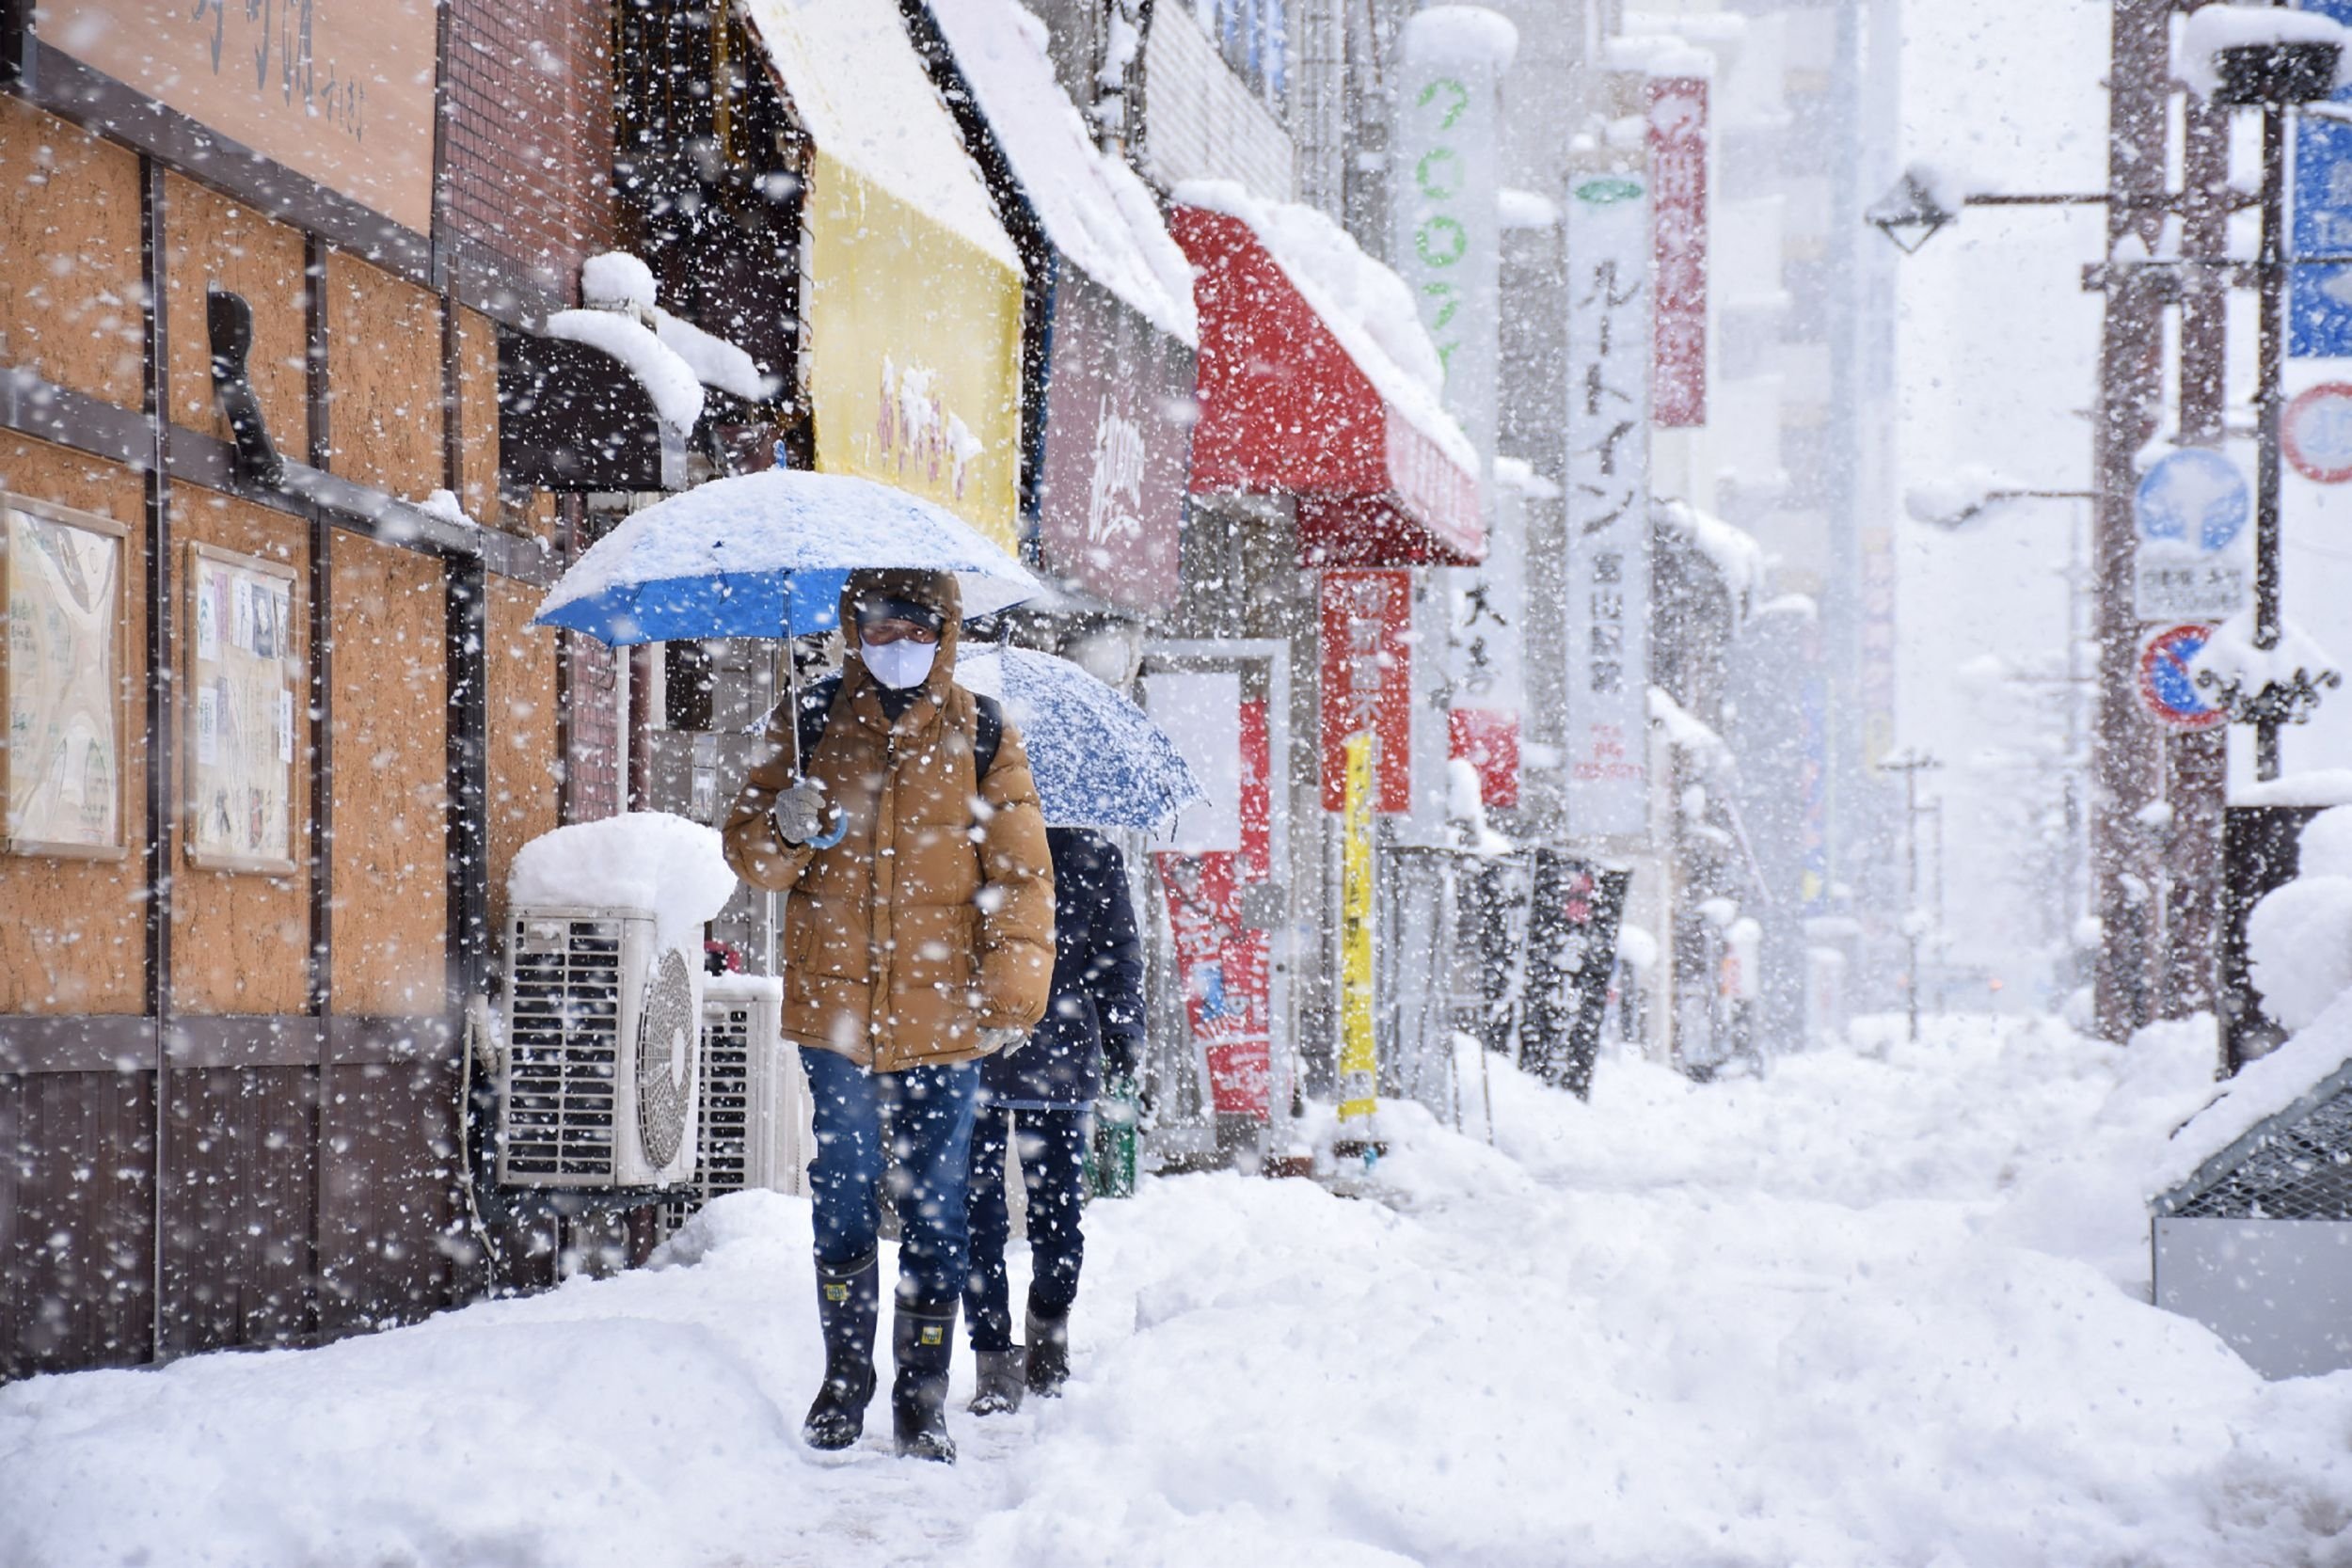 People walk along a street in heavy snow in the city of Toyama, Toyama Prefecture, brought by an extreme cold front along western and northern parts of the country, Japan, Dec. 27, 2021. (AFP Photo)